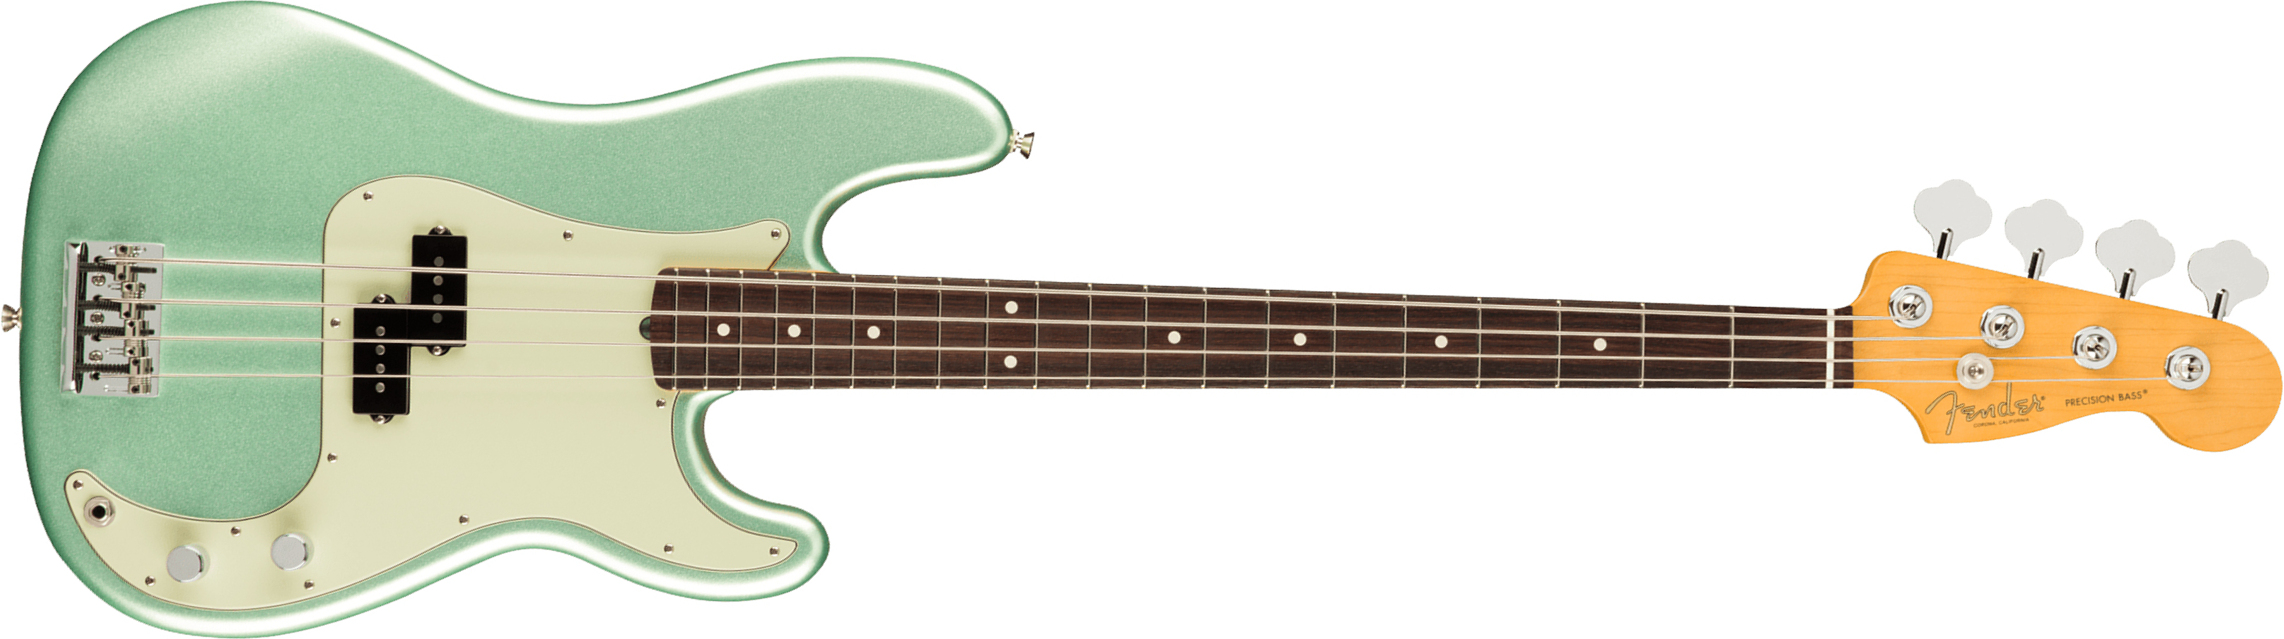 Fender Precision Bass American Professional Ii Usa Rw - Mystic Surf Green - Basse Électrique Solid Body - Main picture